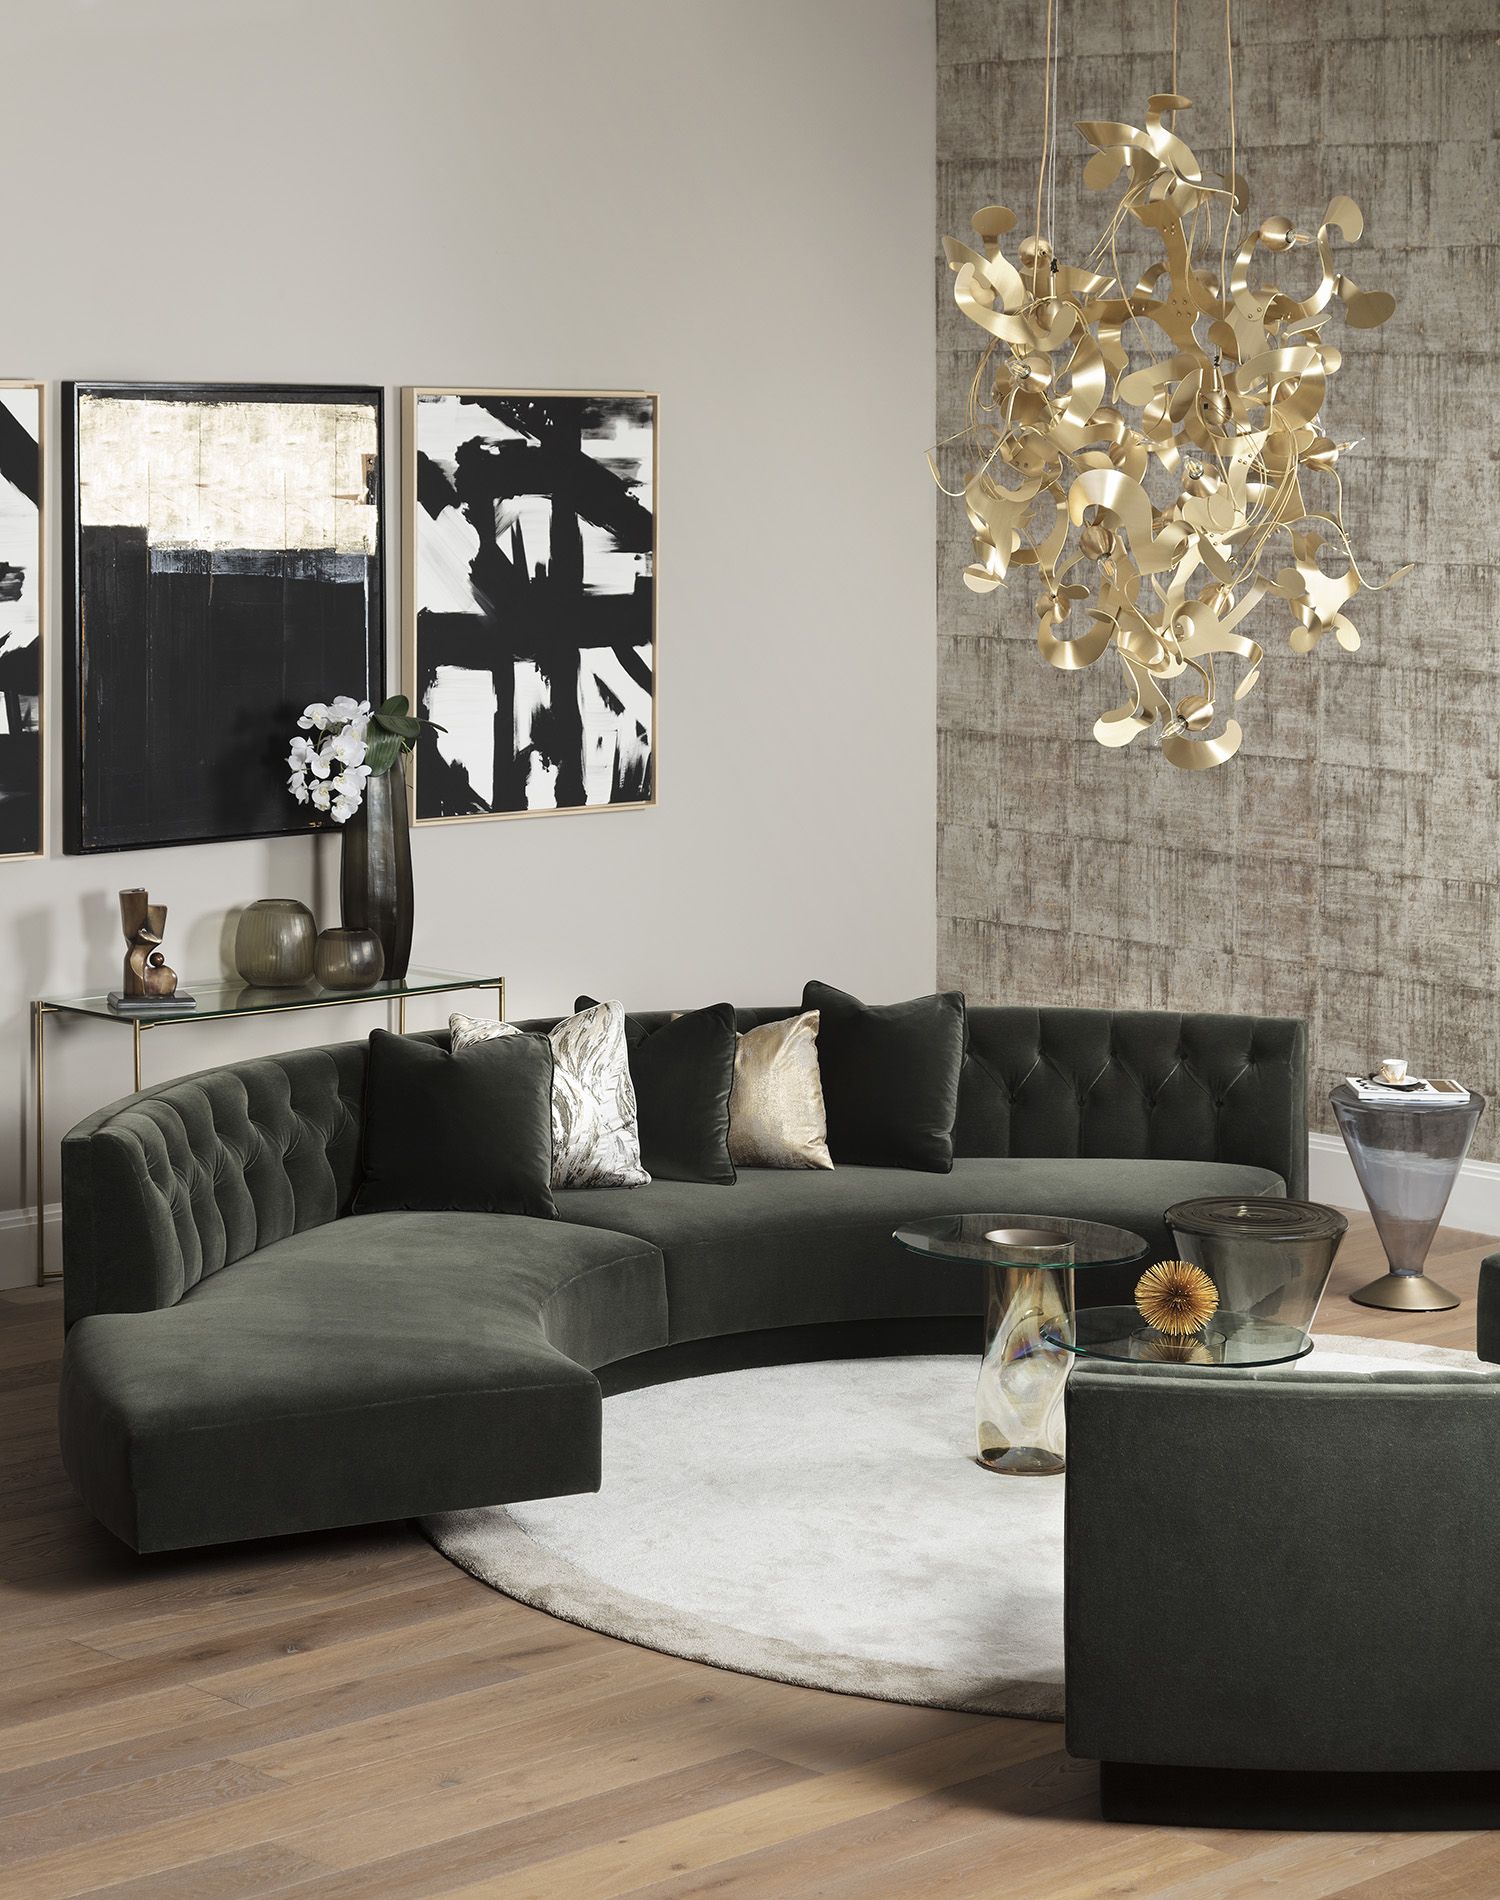 Our CIRCA CURVED SOFA is the definition of statement seating. With a striking ca...